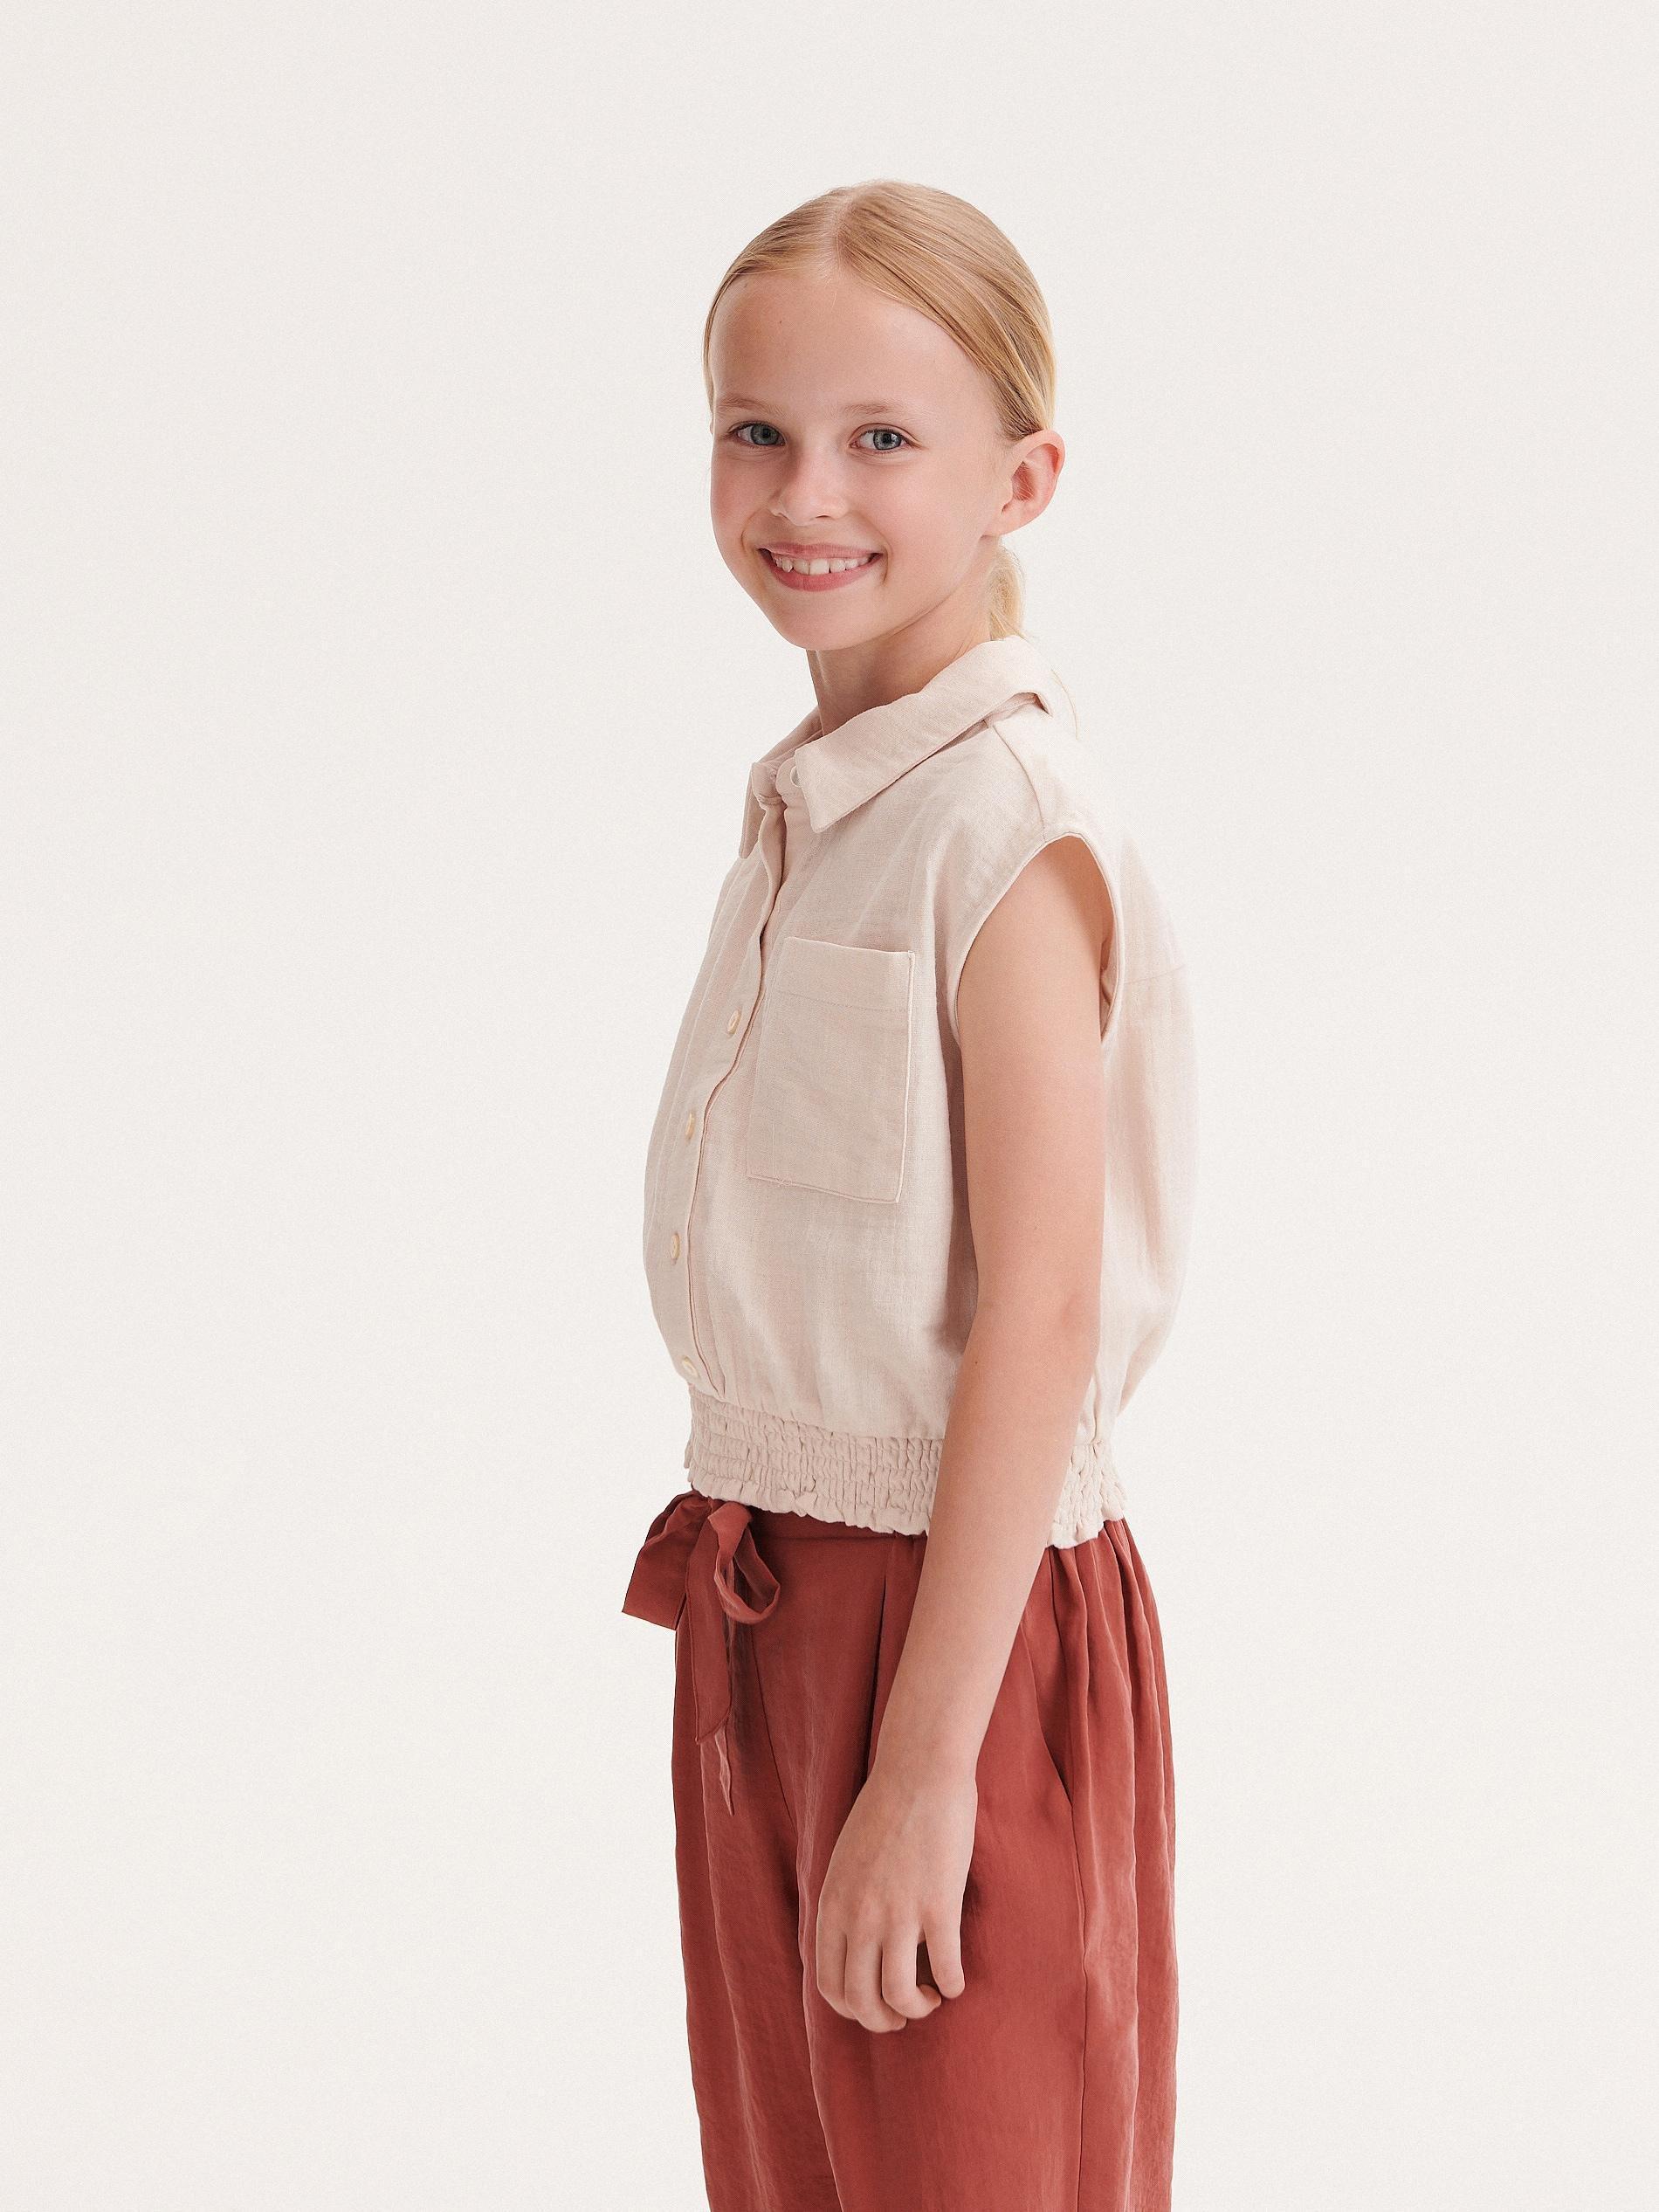 Reserved - Beige Gathered Blouse, Kids Girls